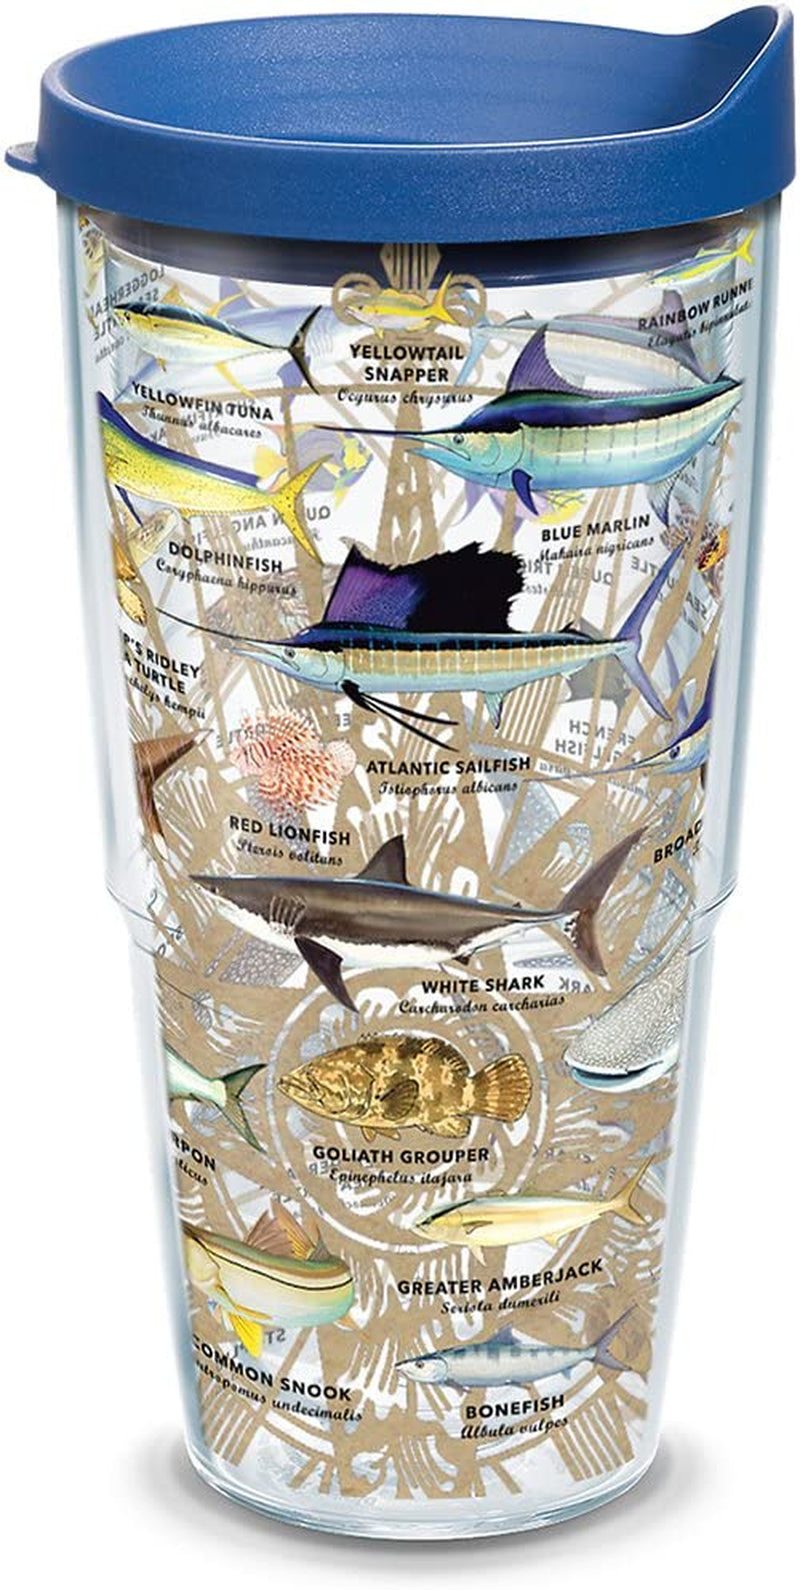 Tervis Made in USA Double Walled Guy Harvey Insulated Tumbler Cup Keeps Drinks Cold & Hot, 16Oz Mug - No Lid, Charts Home & Garden > Kitchen & Dining > Tableware > Drinkware Tervis Classic 24 oz 